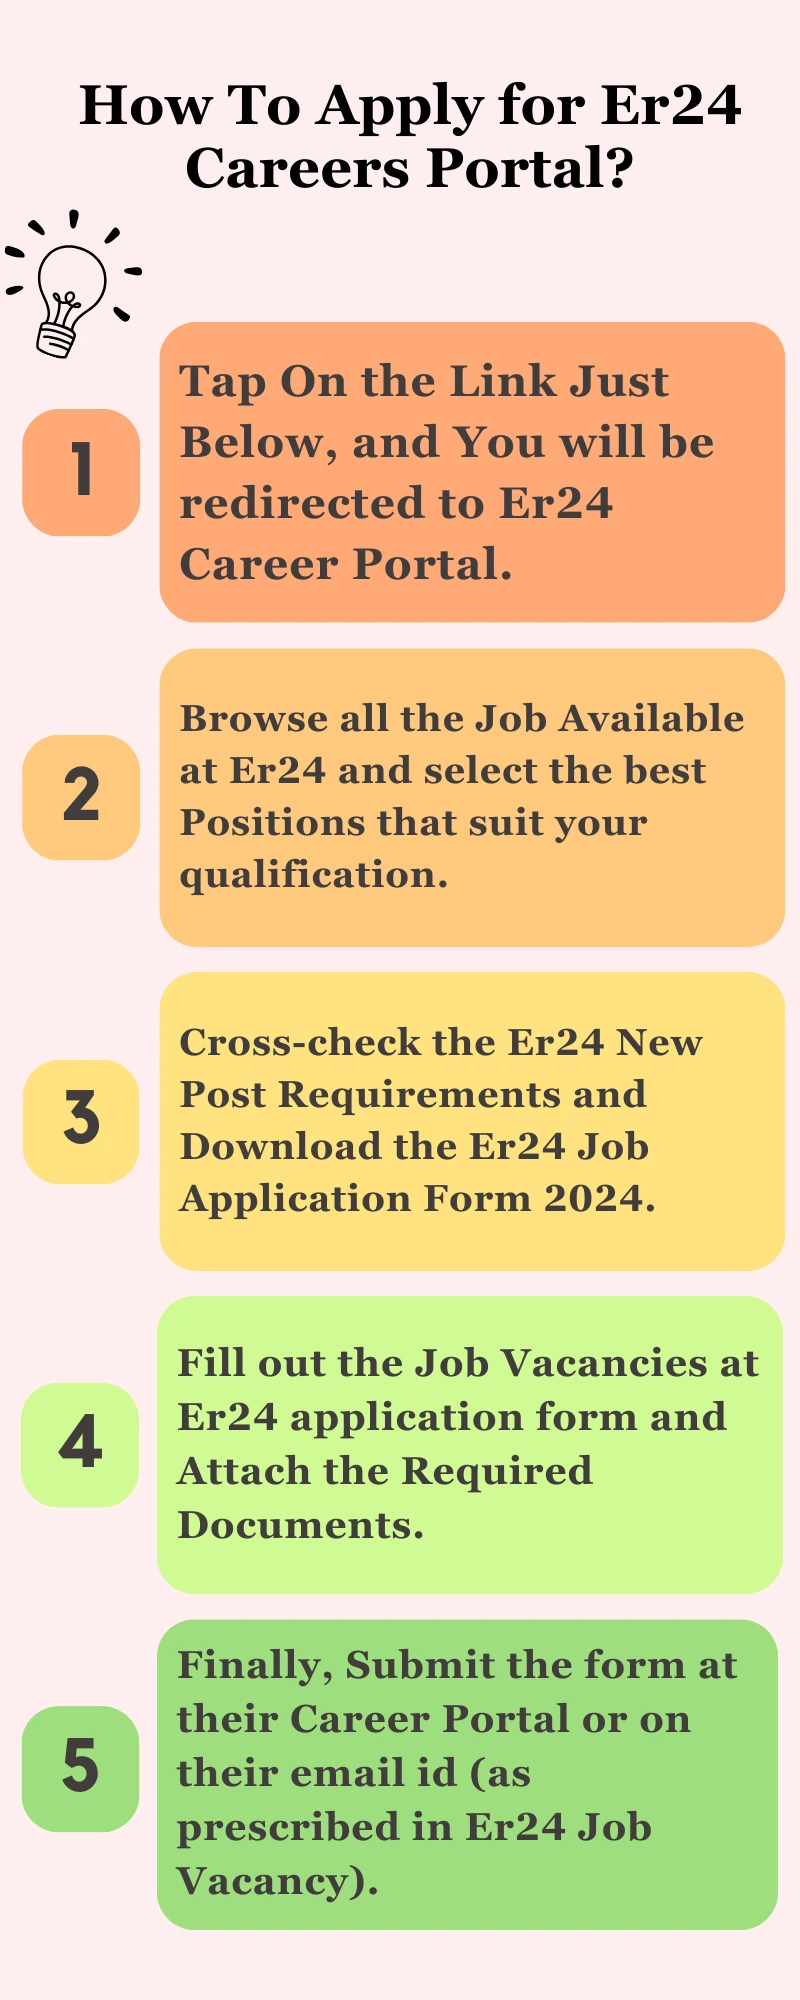 How To Apply for Er24 Careers Portal?